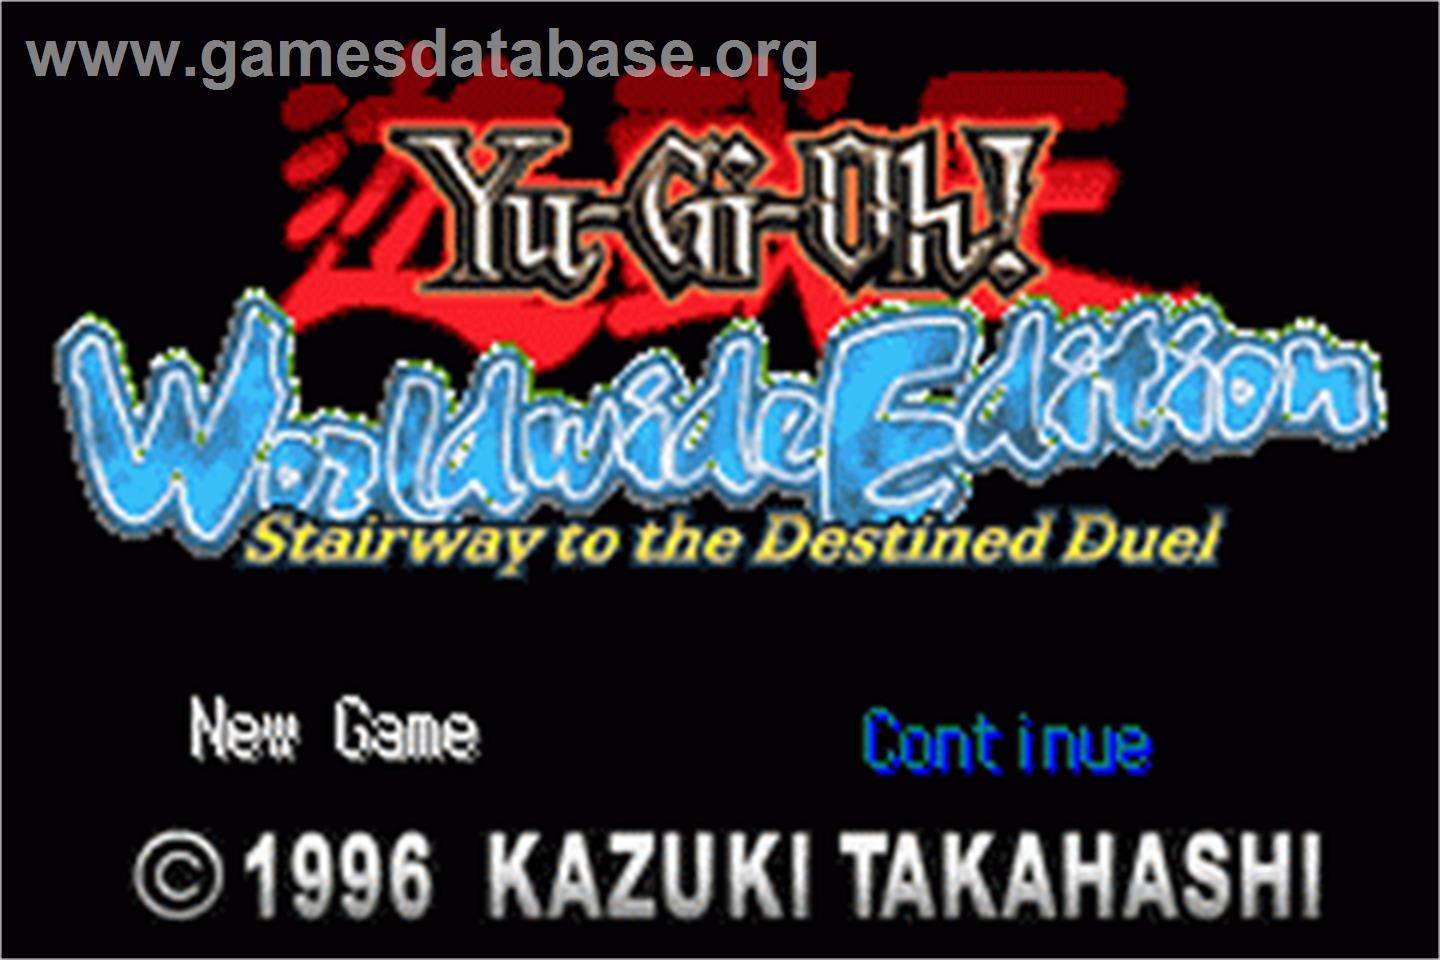 Yu-Gi-Oh! Worldwide Edition: Stairway to the Destined Duel - Nintendo Game Boy Advance - Artwork - Title Screen